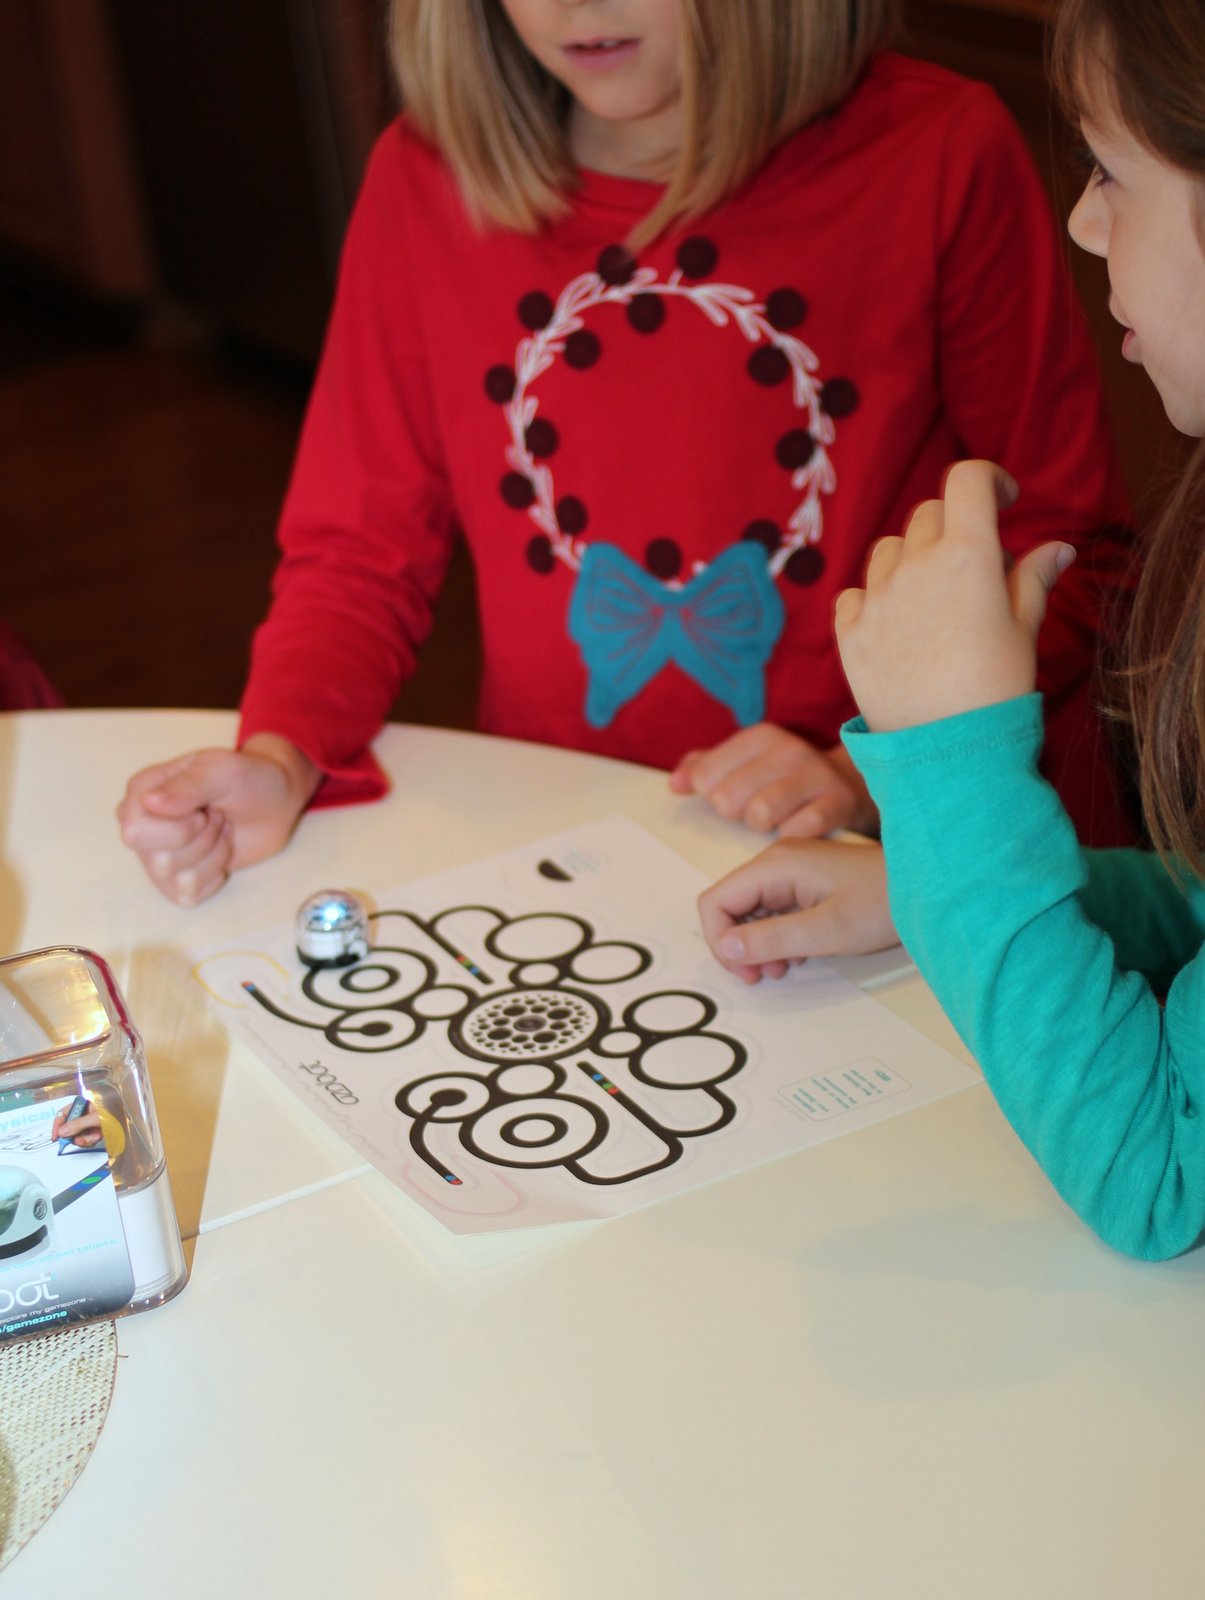 Ozobots and Cupcakes - Coding over Brunch! - Shes {kinda} Crafty